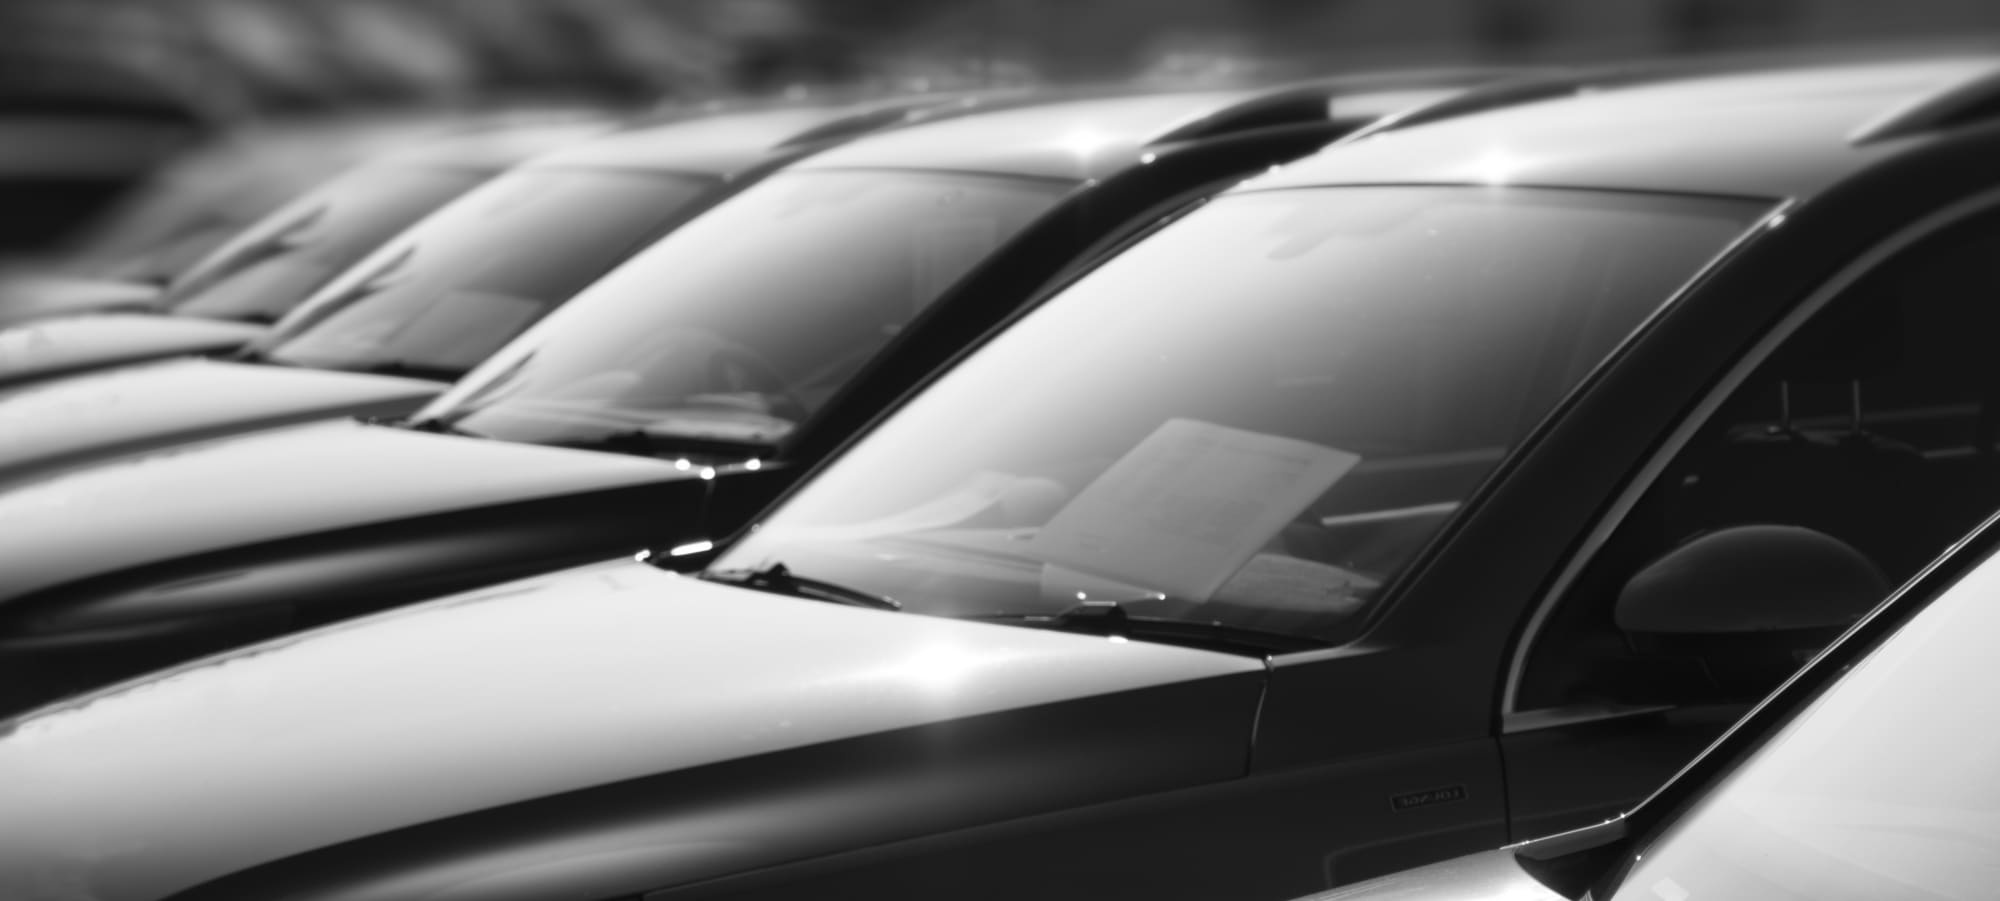 Row of used cars at a dealer - black and white